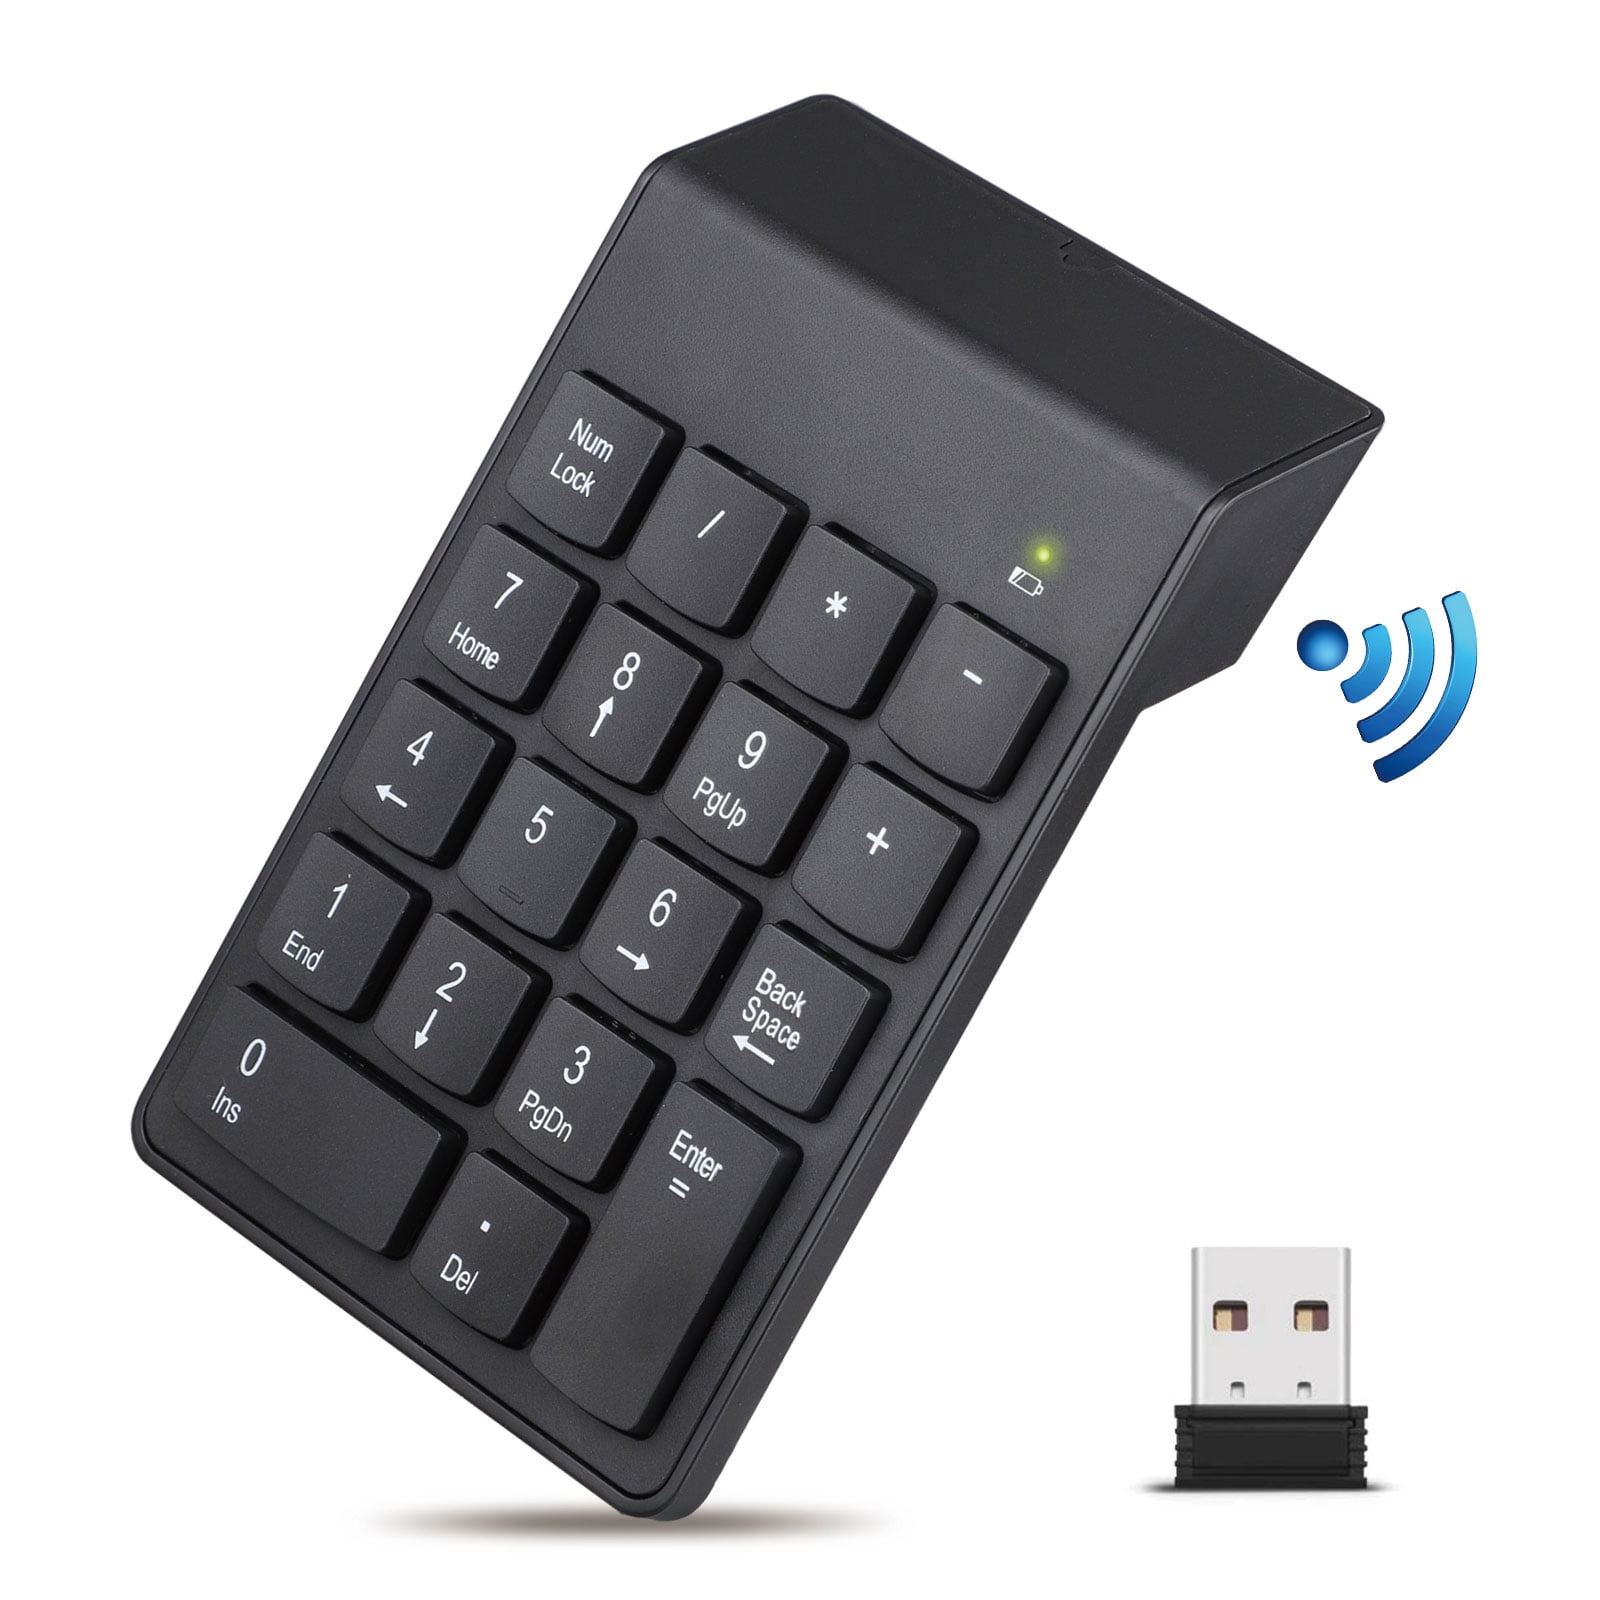 Numeric Keypad Wireless Number Pad 2.4GHz Mini Slim Numeric Keypads 18 Keys Financial Accounting Numeric Keyboard Extensions with USB Receiver for Laptop Desktop Computer PC Black 